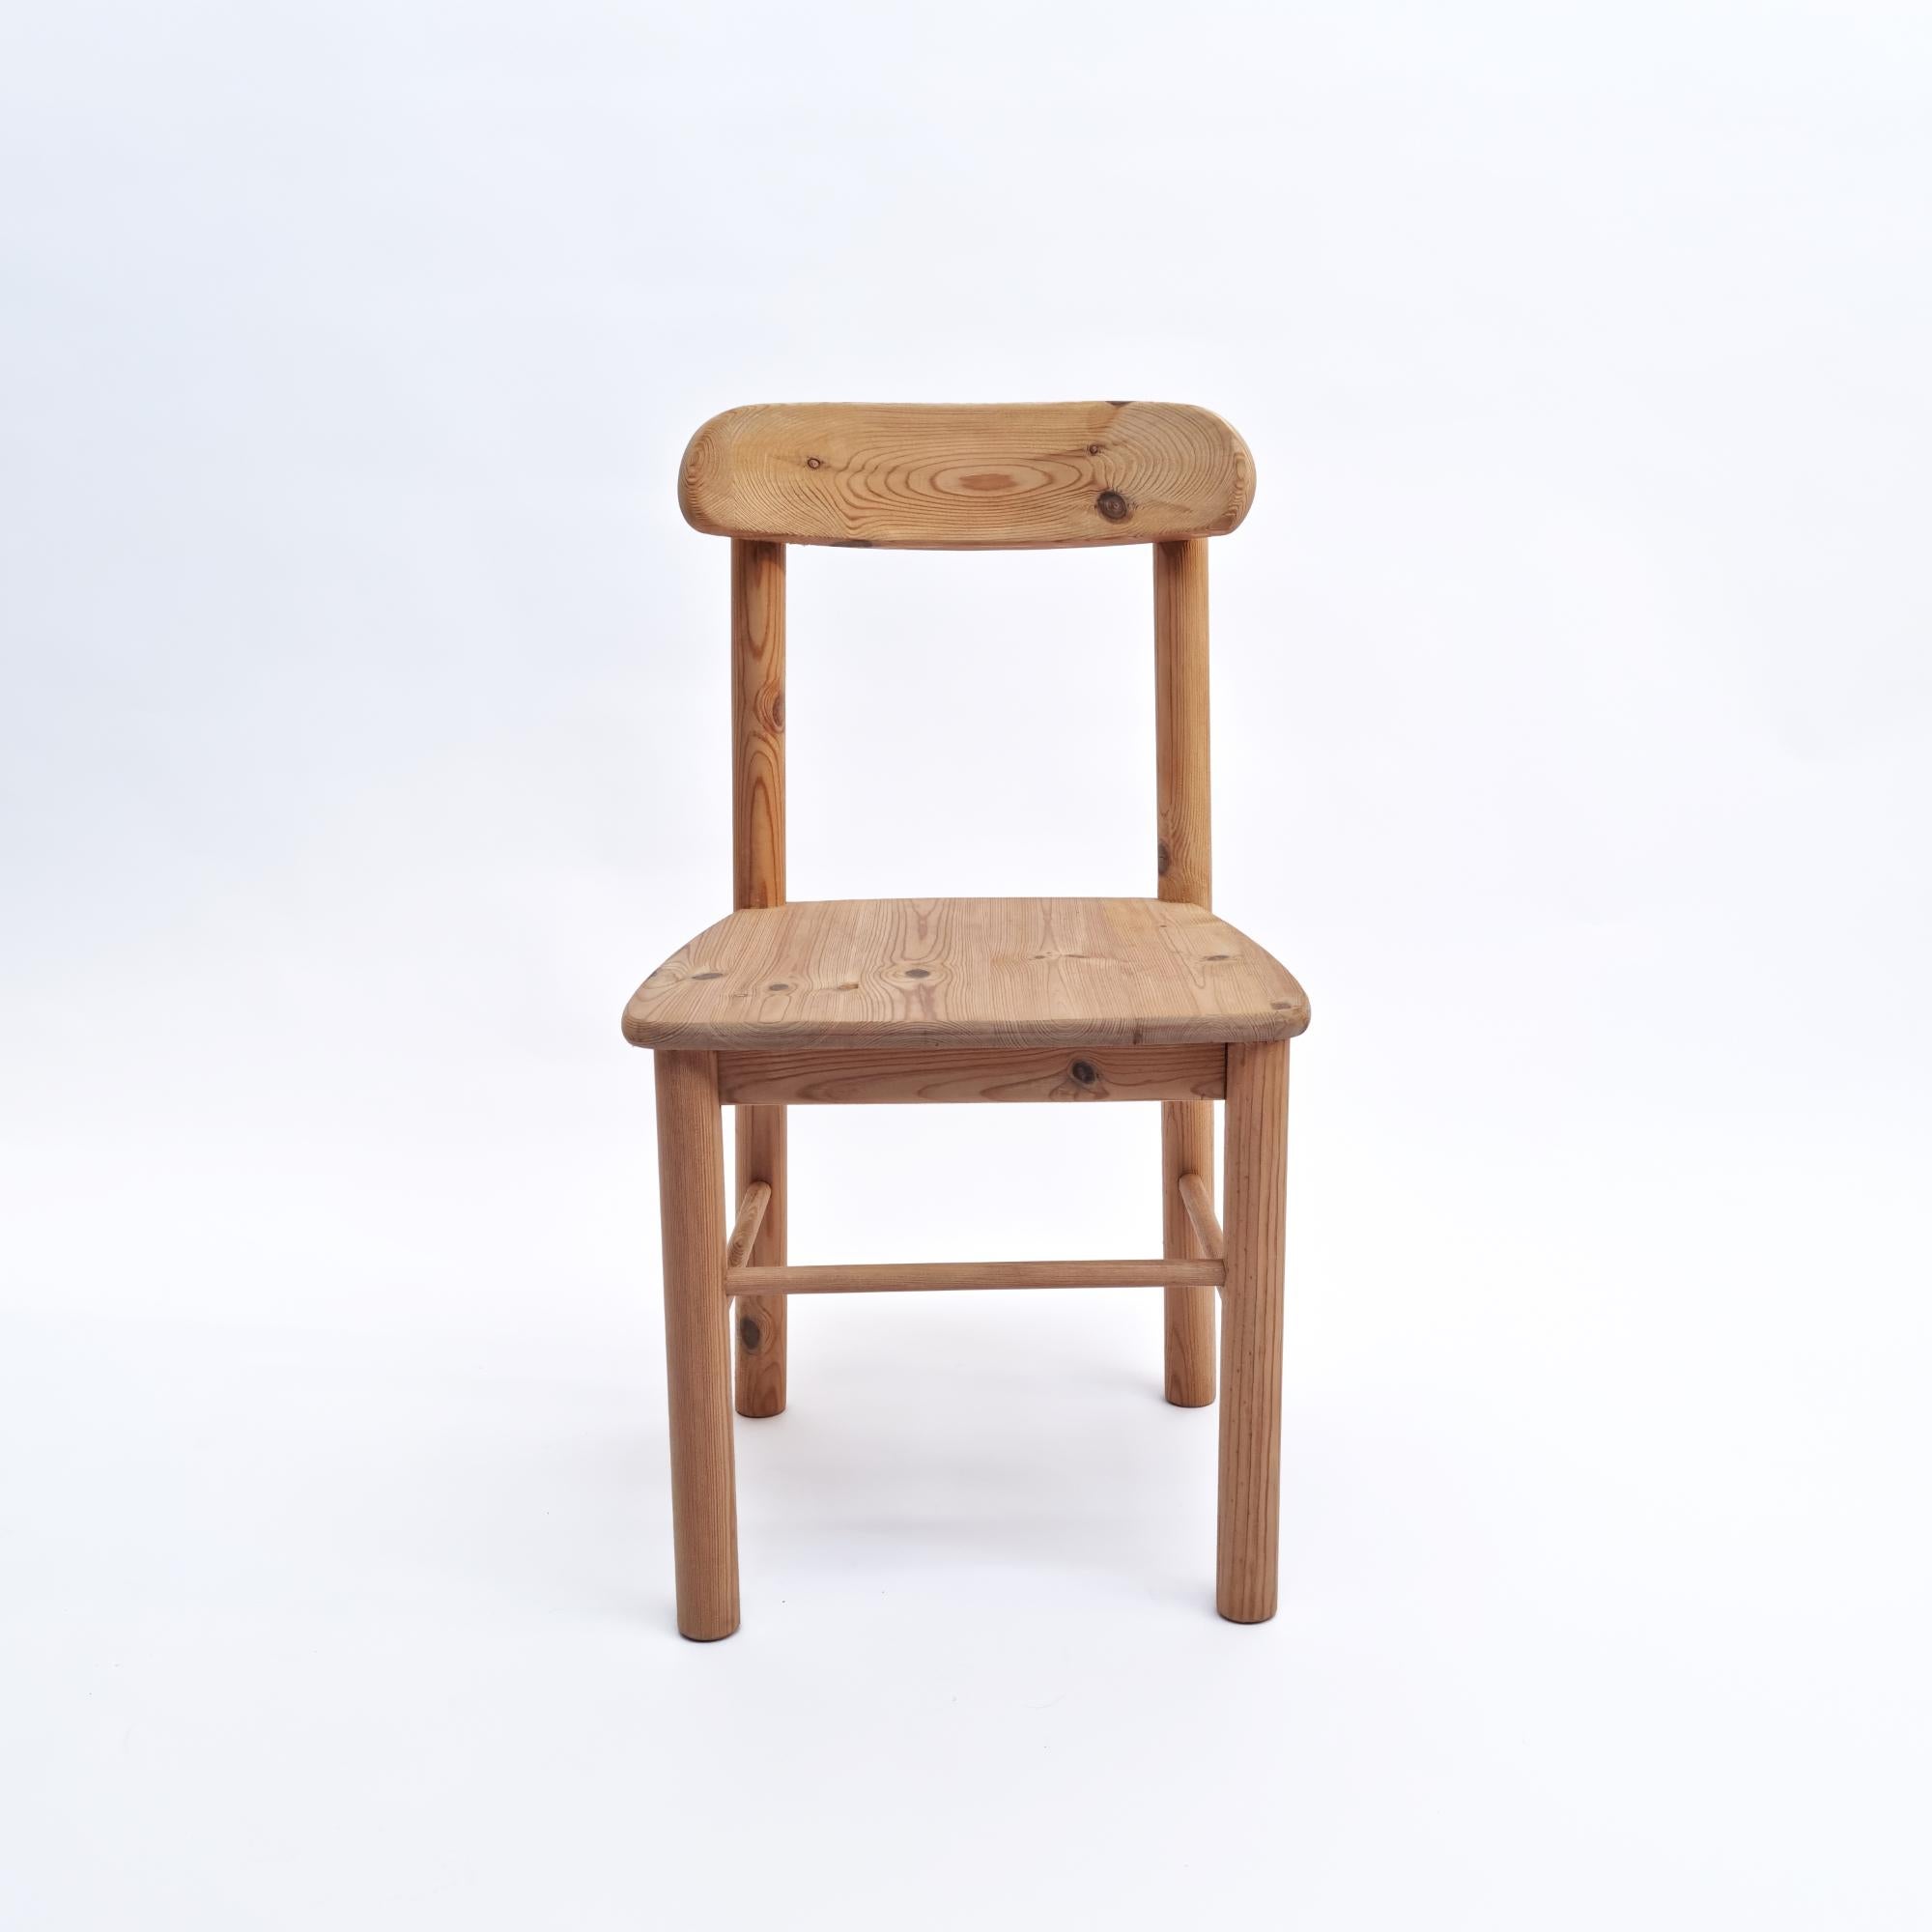 Bleached Rainer Daumiller Style Pine Chair, 1970s '4 Pieces Available' For Sale